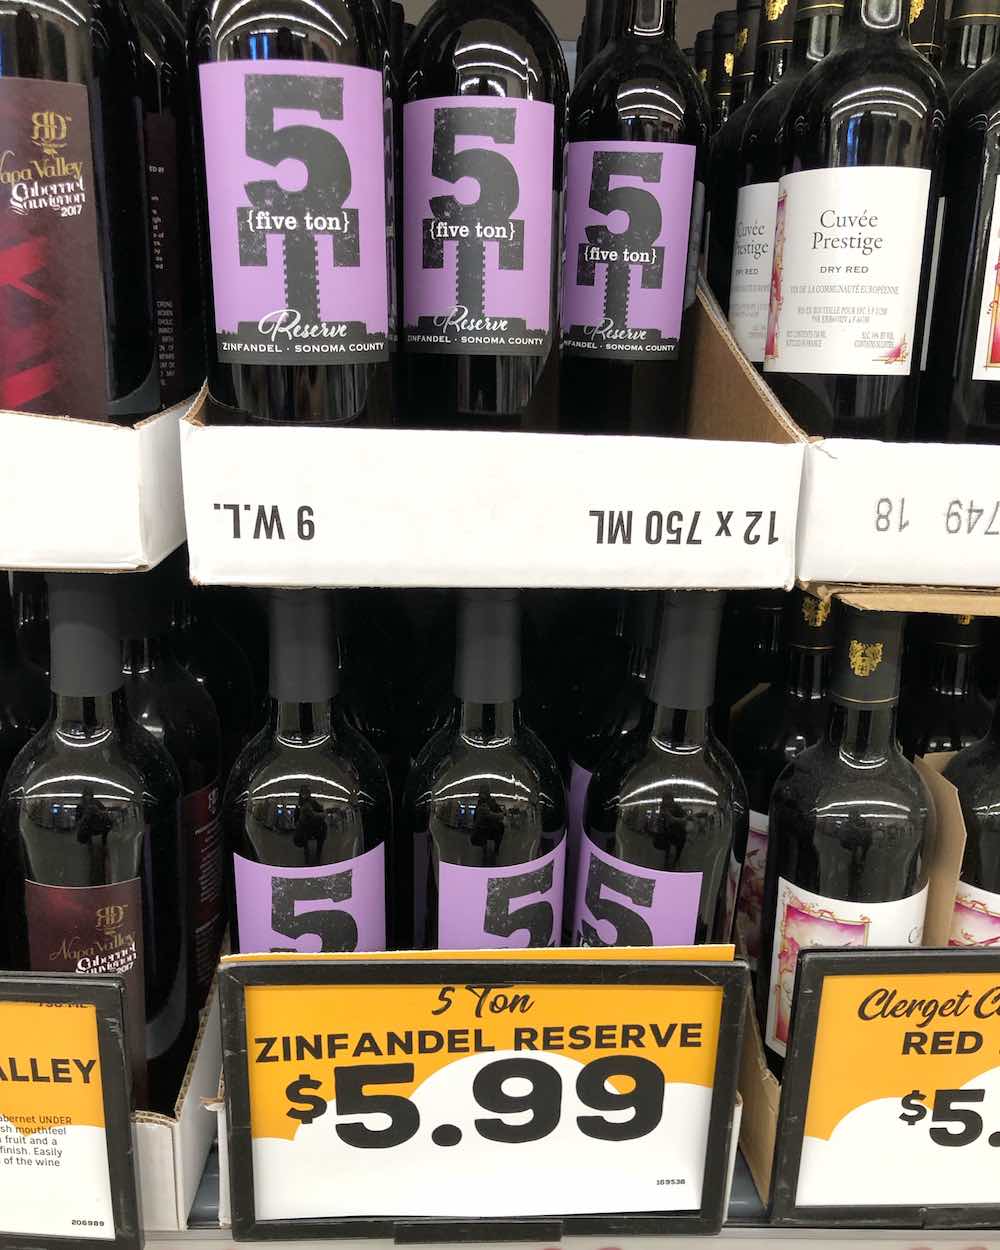 Grocery Outlet Wine - Five Ton Reserve Sonoma County Zinfandel